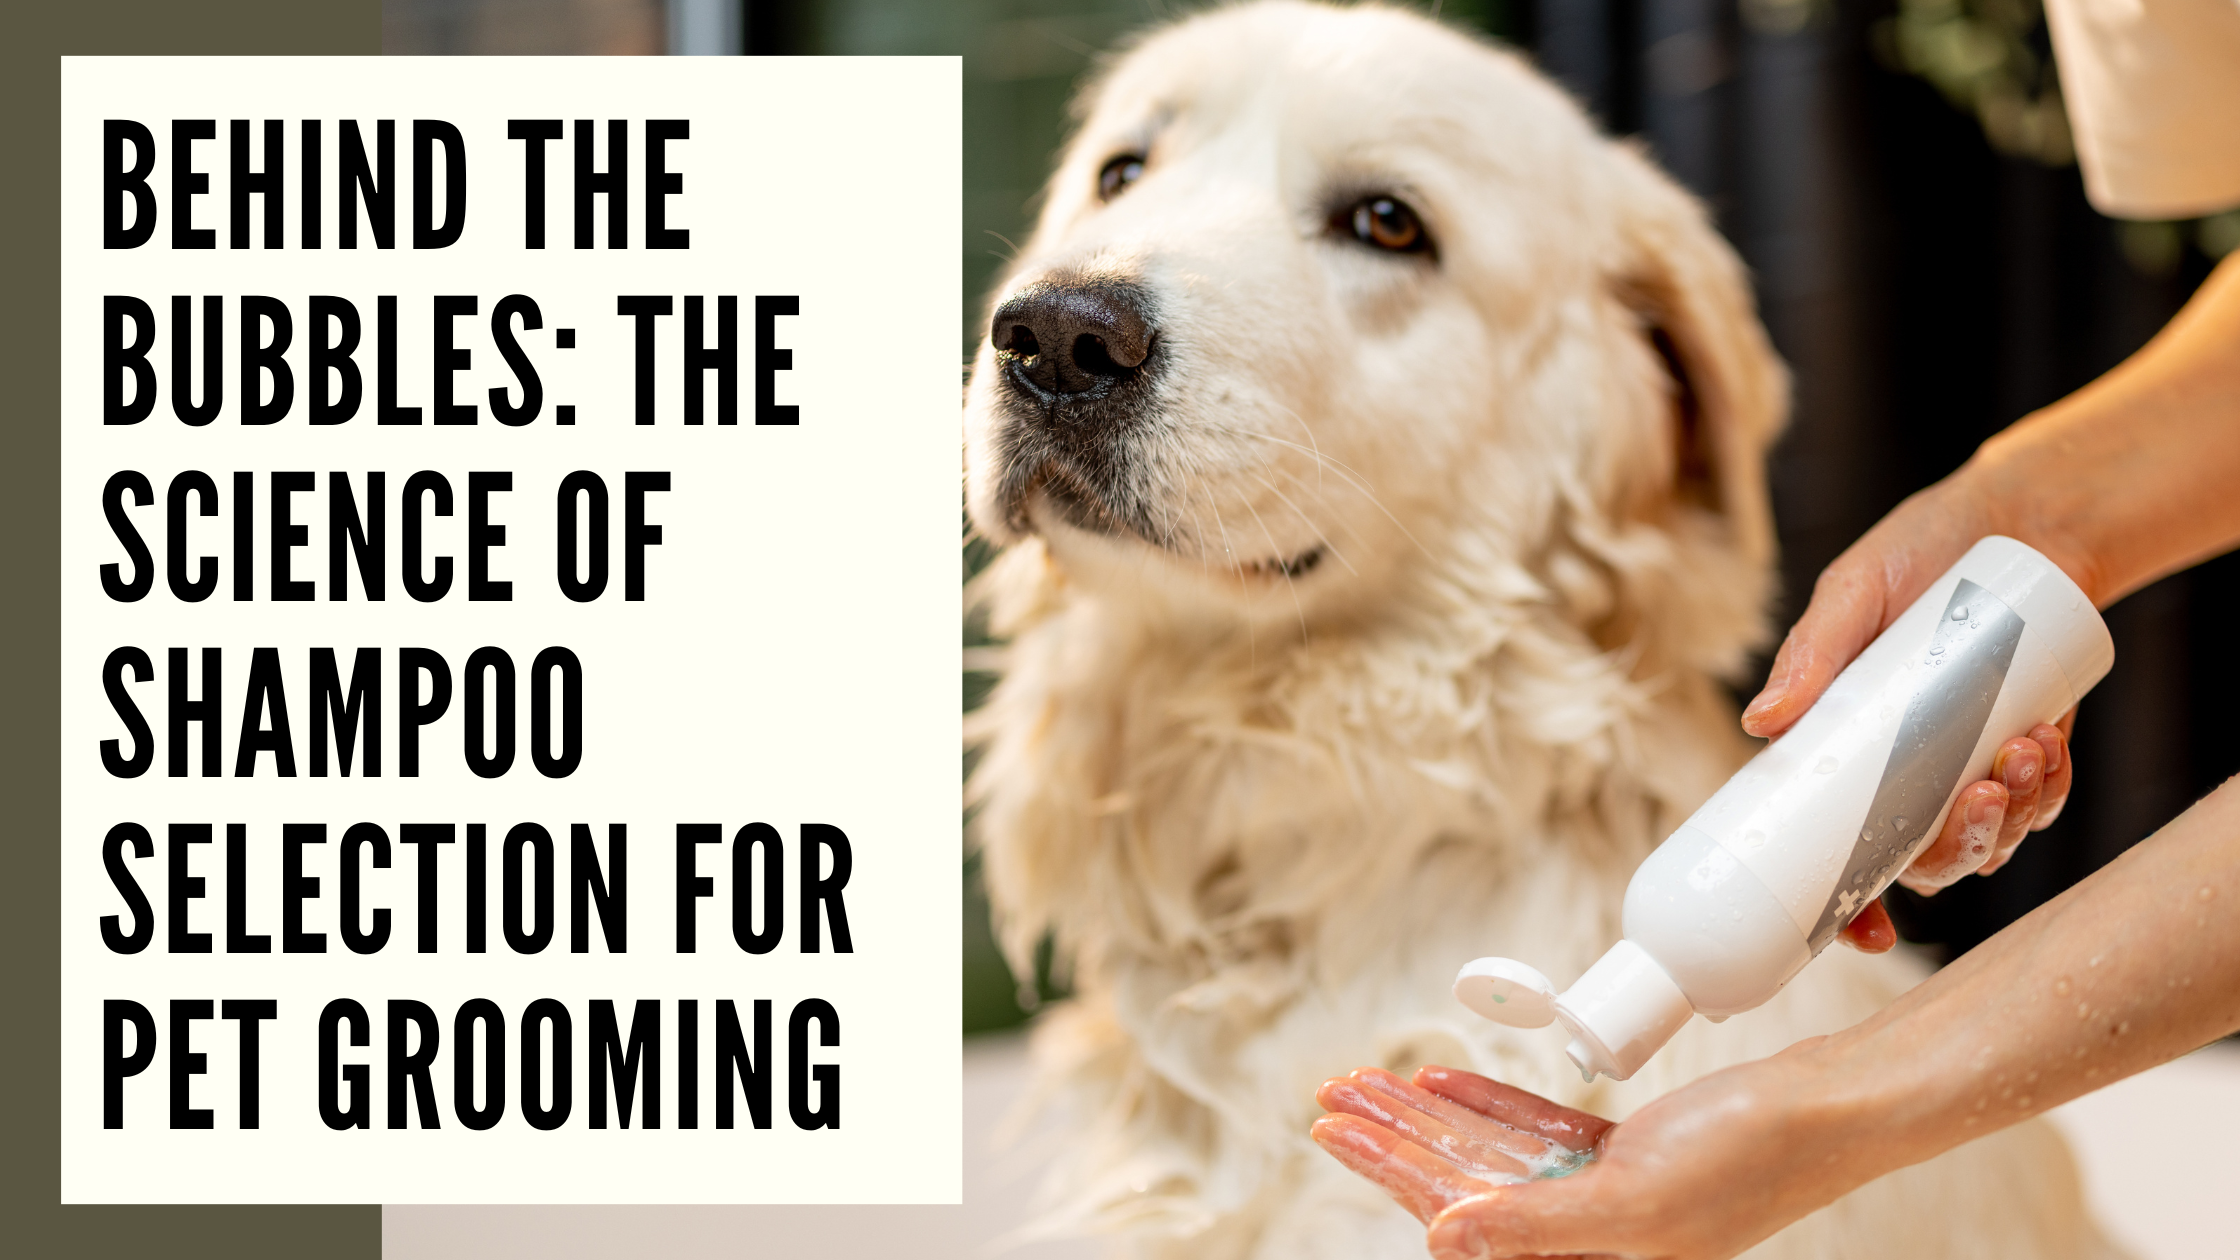 Behind the Bubbles The Science of Shampoo Selection for Pet Grooming